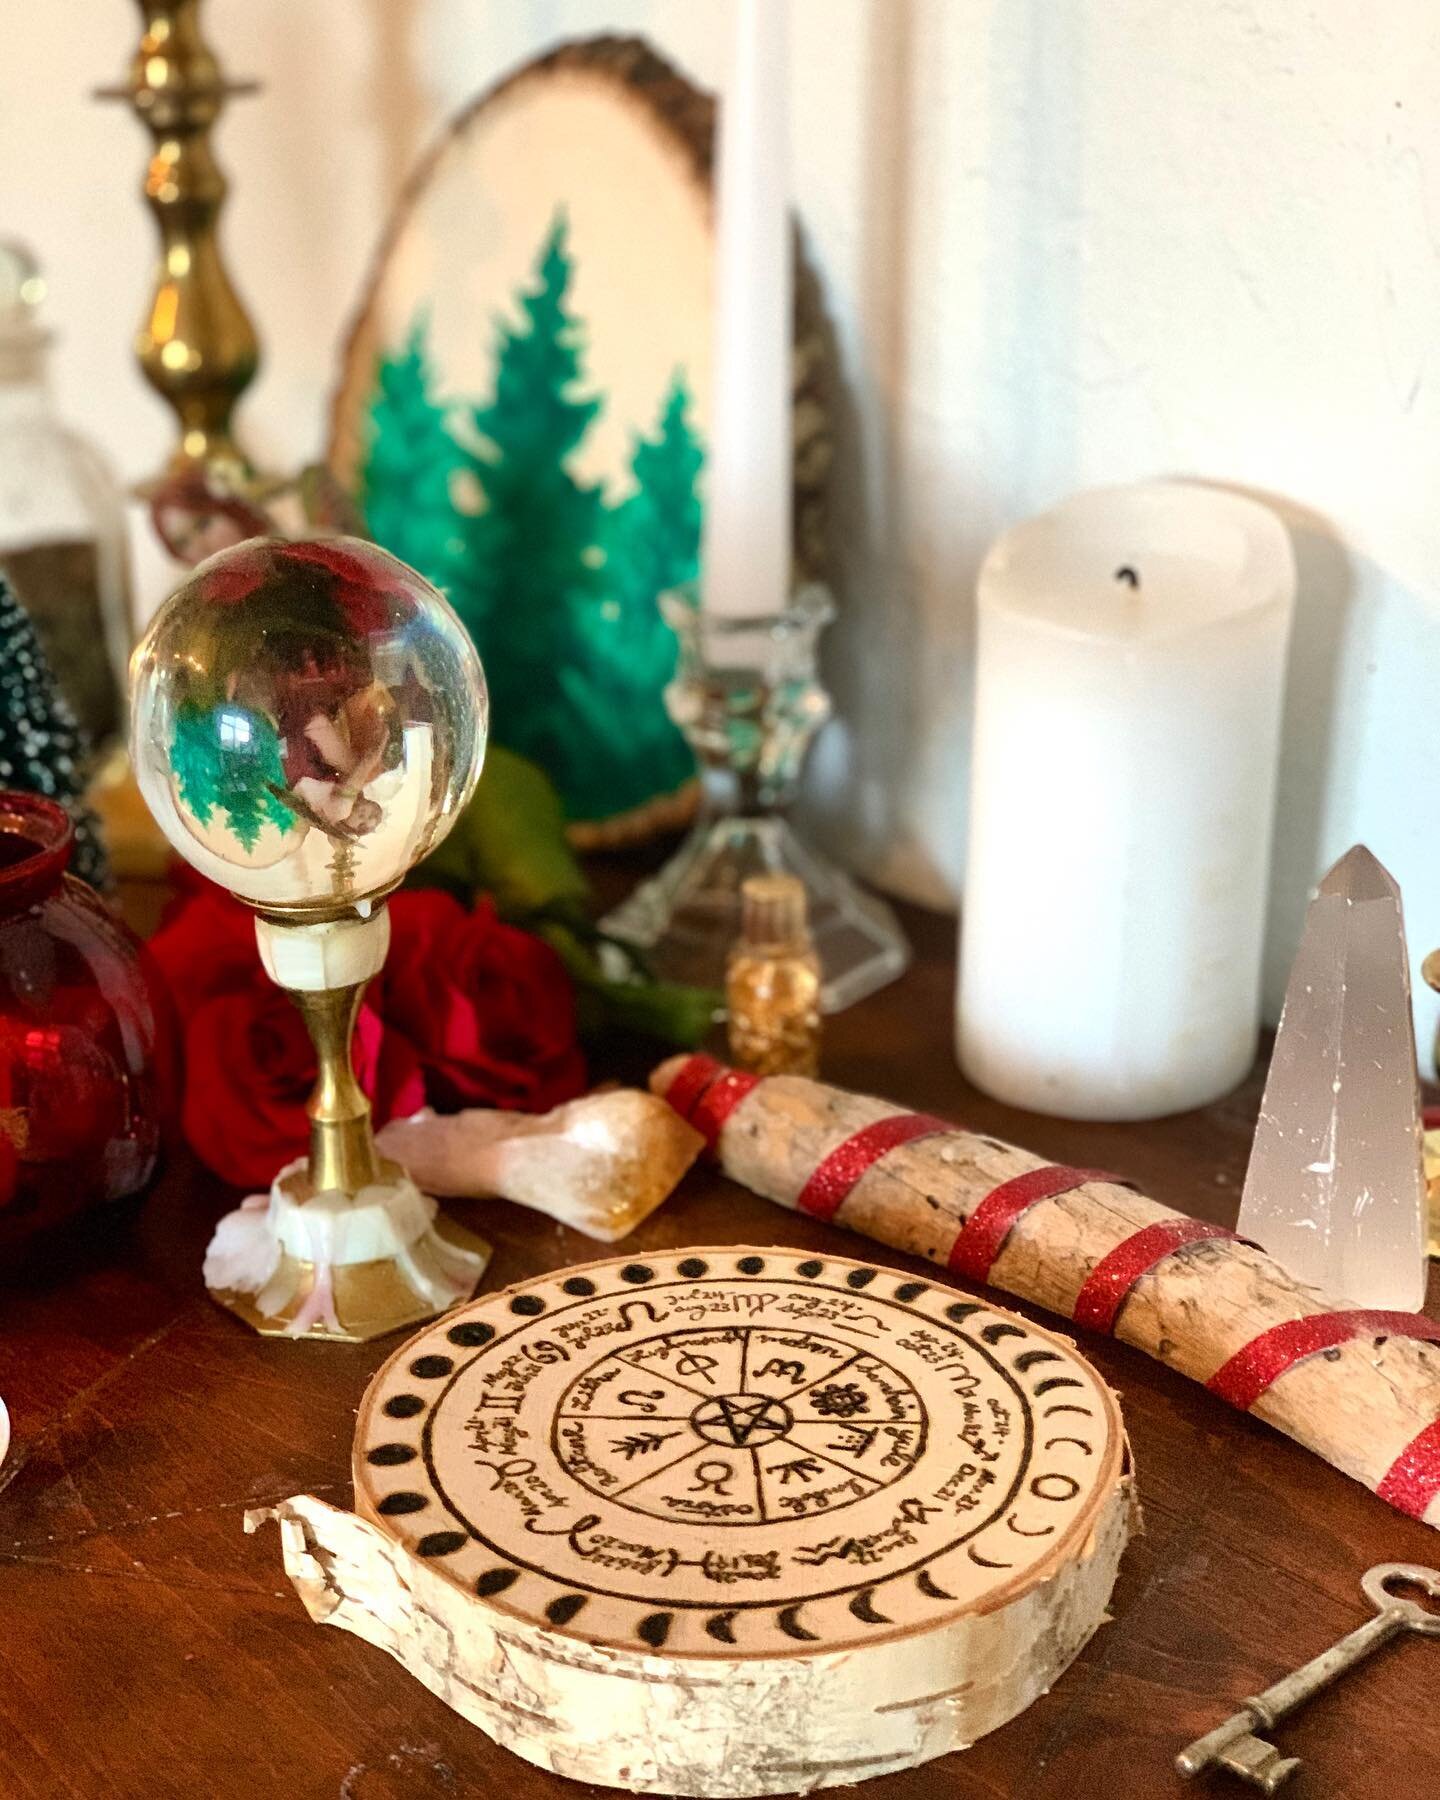 New works going up today on www.maurabennett.com/shop *link in bio* 
❄️✨❄️
Live-edge wood paintings &amp; wood burnings dropping this week, including this astrological Wheel of the Year calendar. (a hint of an evergreen painting behind)
🎄✨🎄
Only 6 